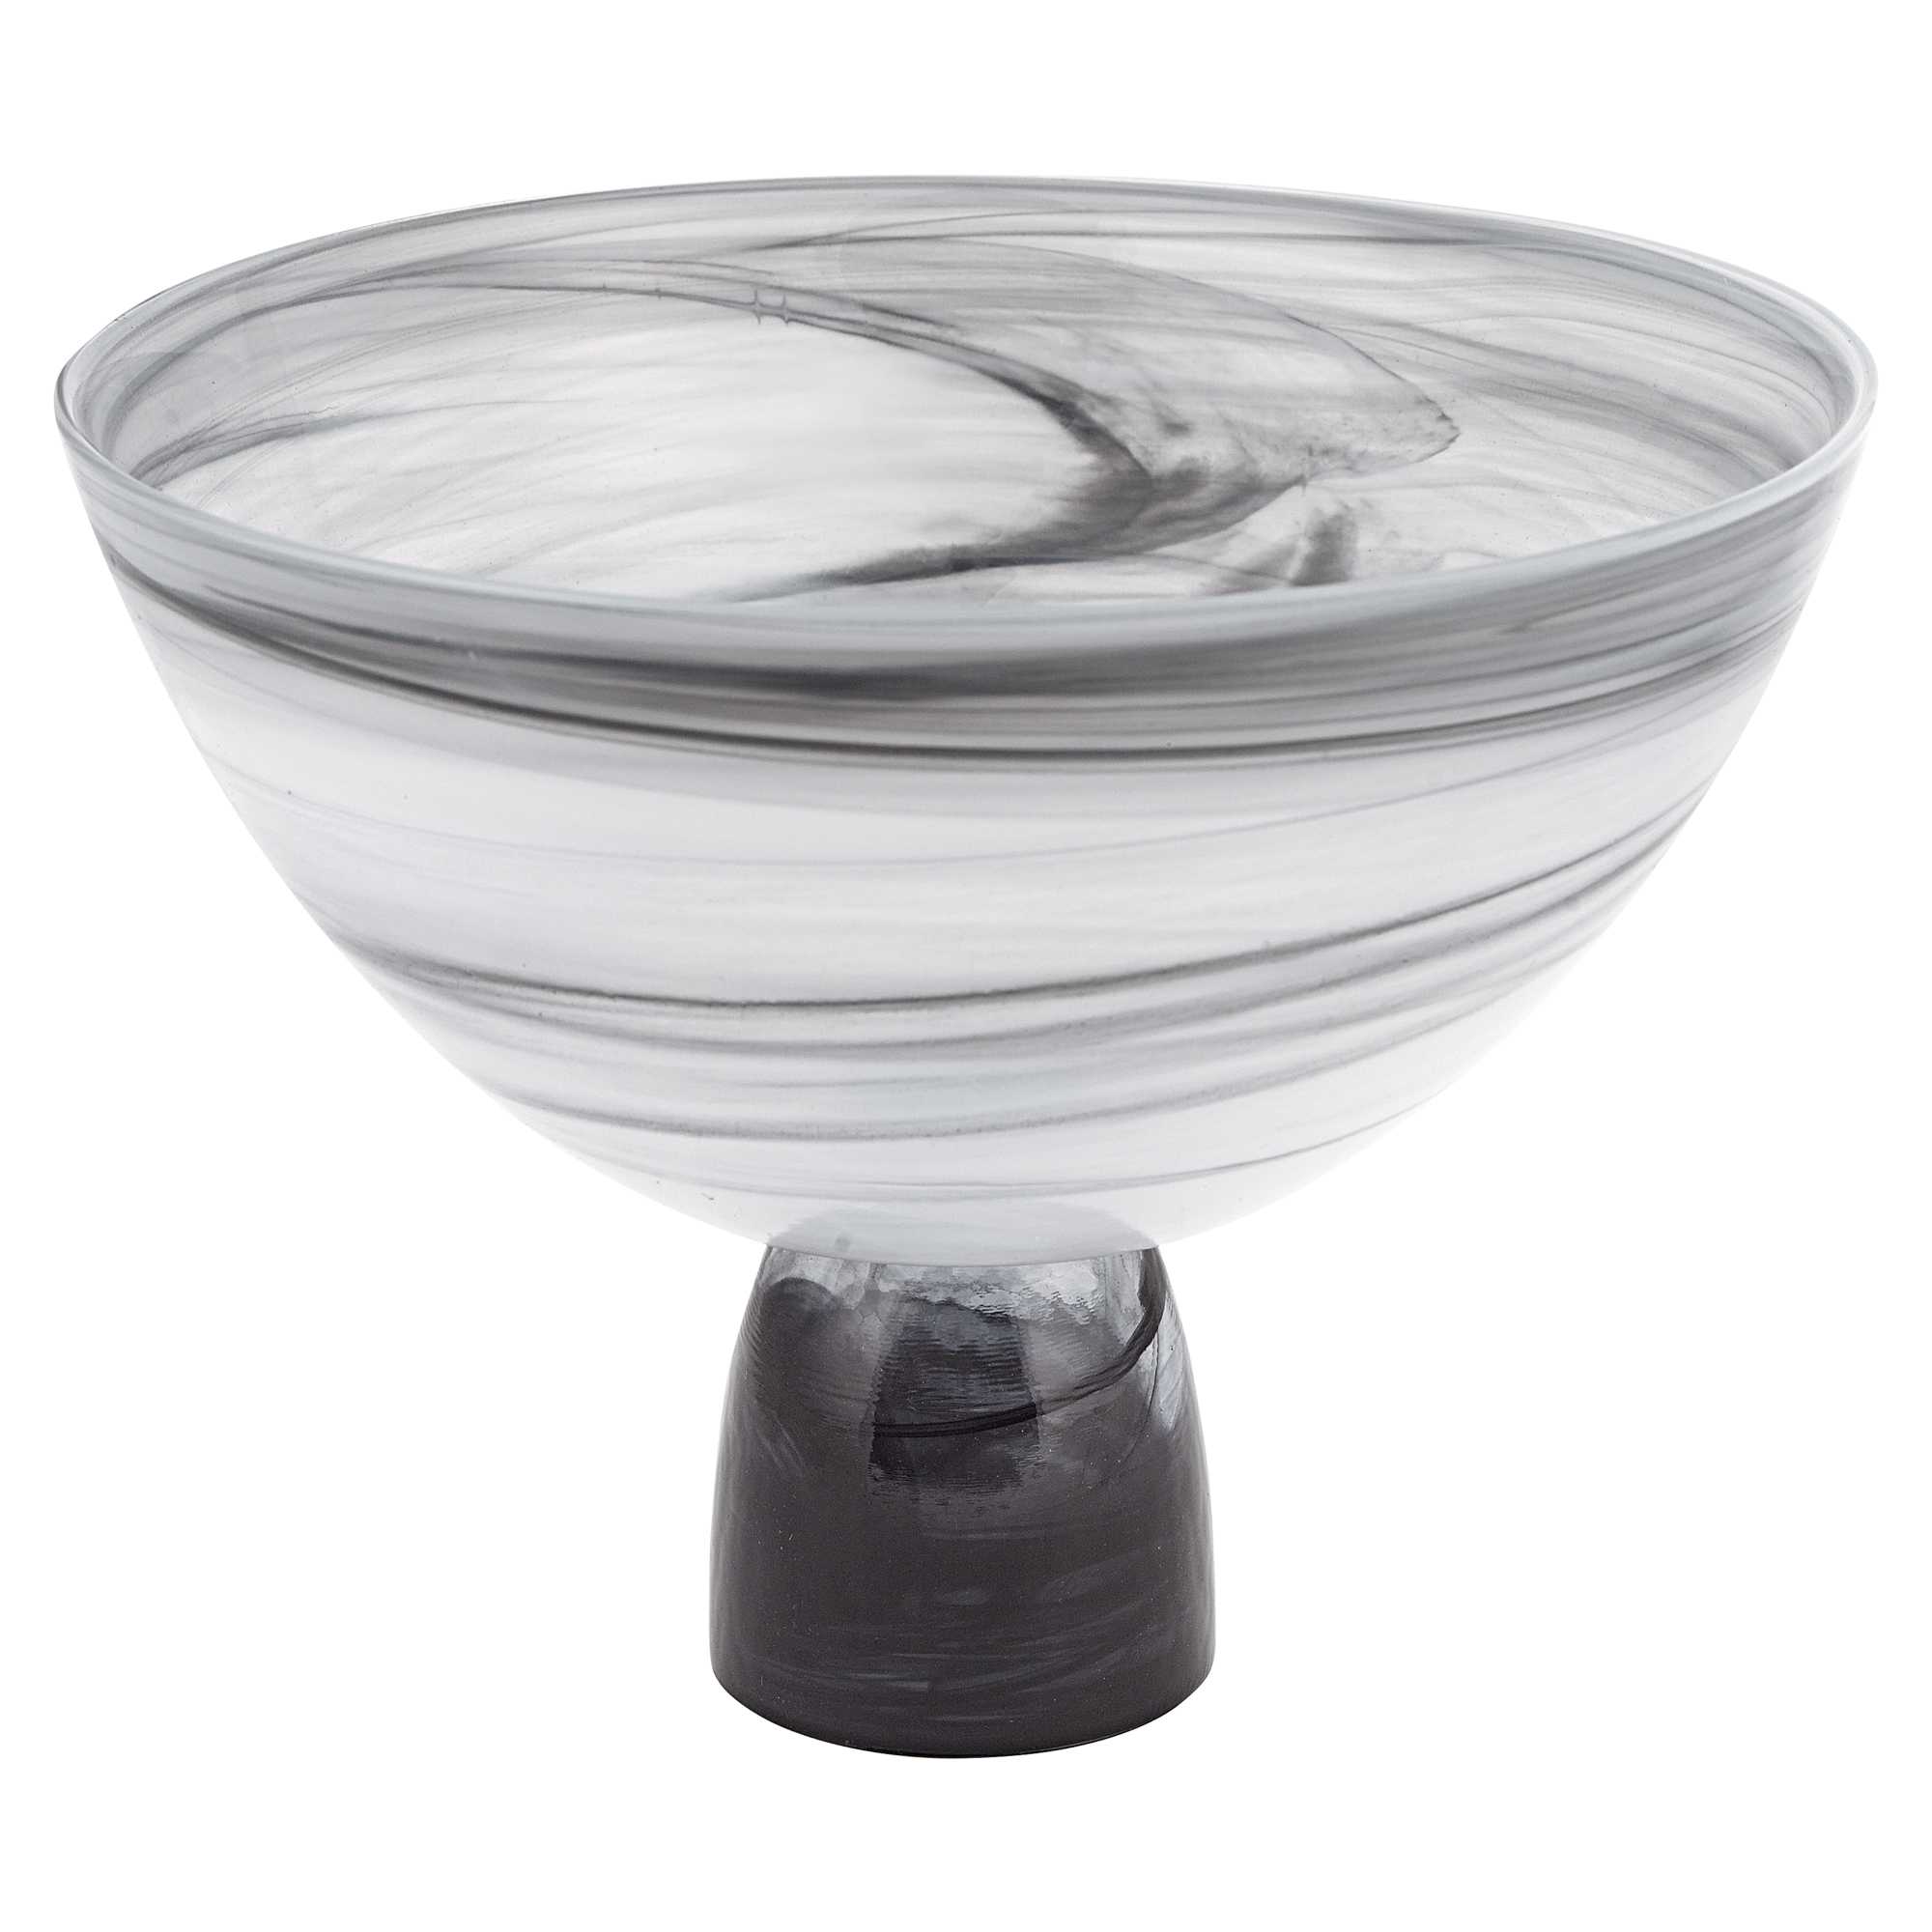 10" Mouth Blown Polish Glass Footed Centerpiece Bowl